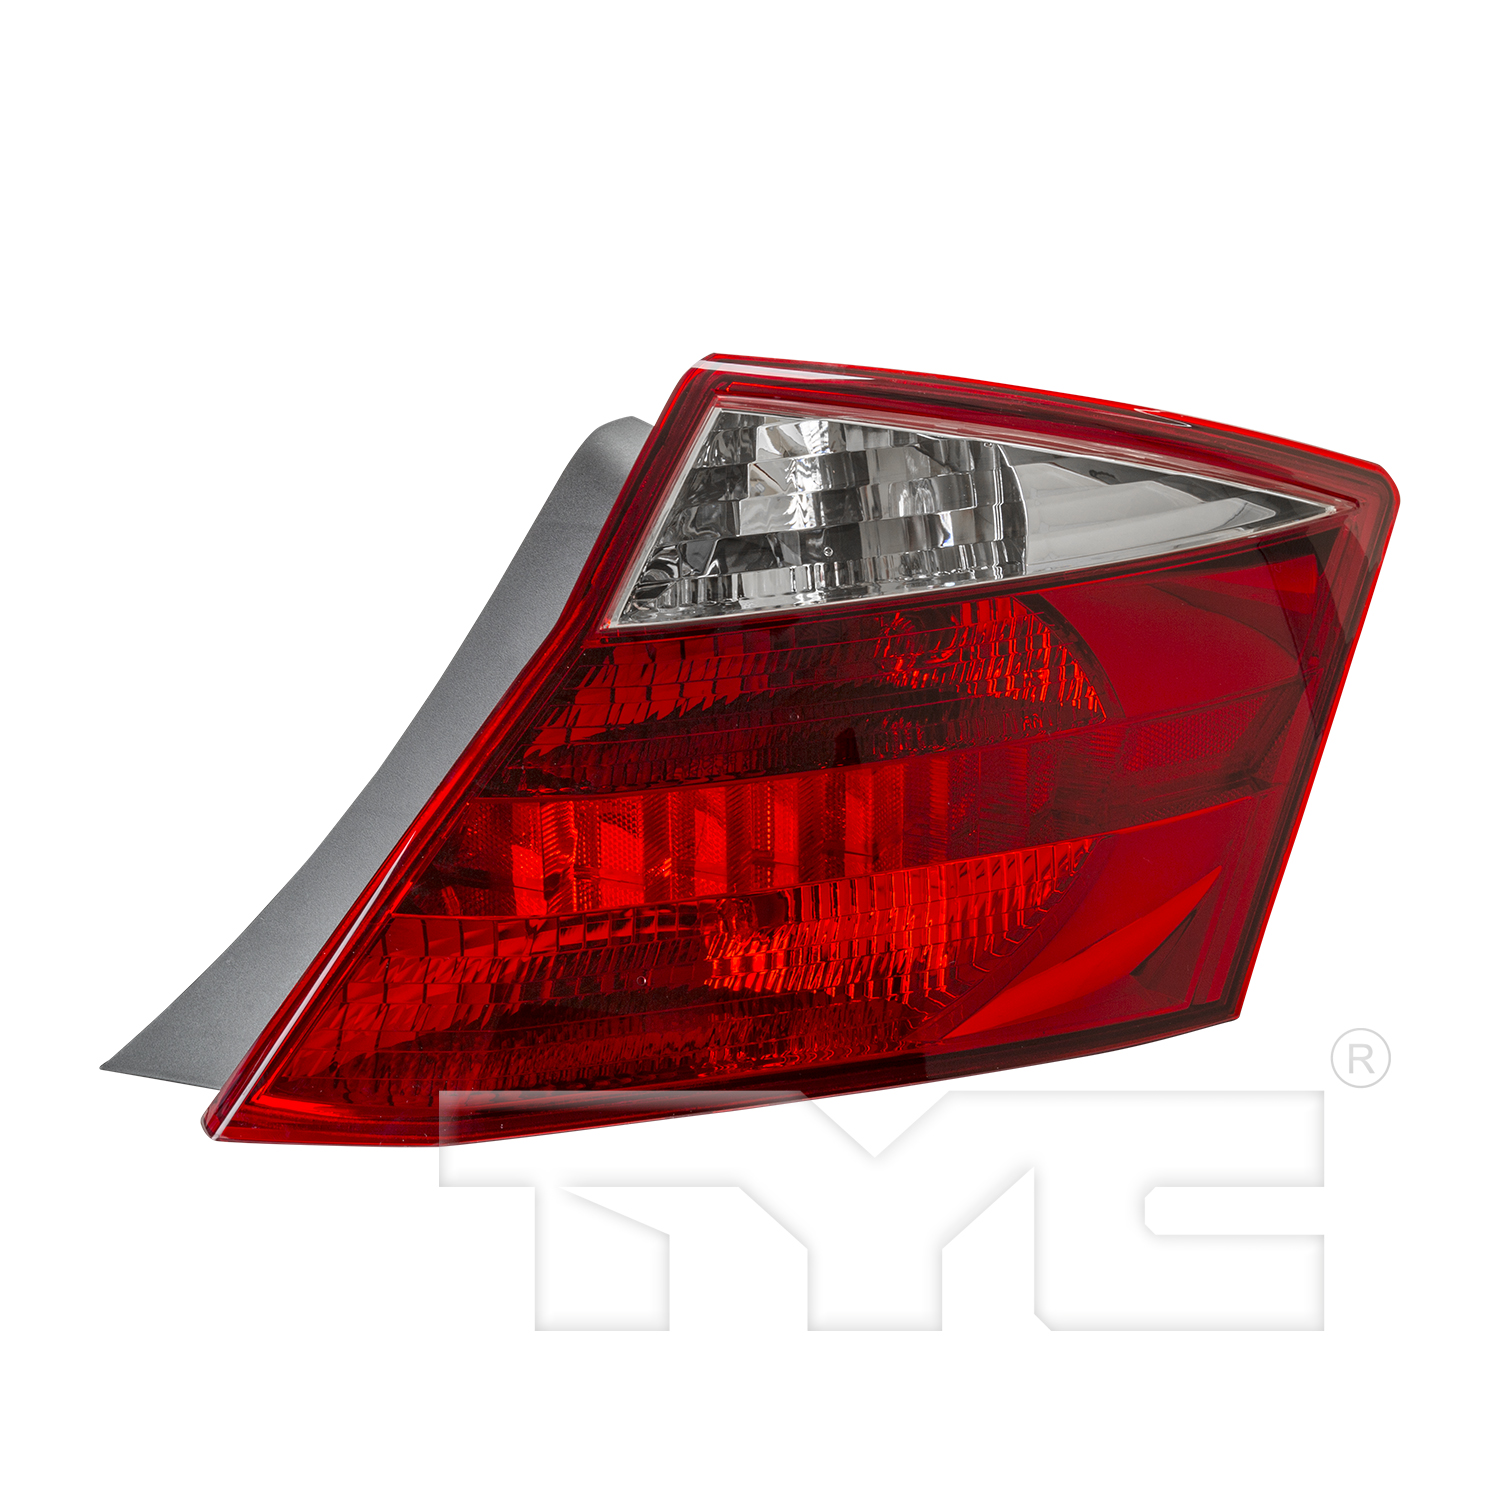 Aftermarket TAILLIGHTS for HONDA - ACCORD, ACCORD,08-10,RT Taillamp assy